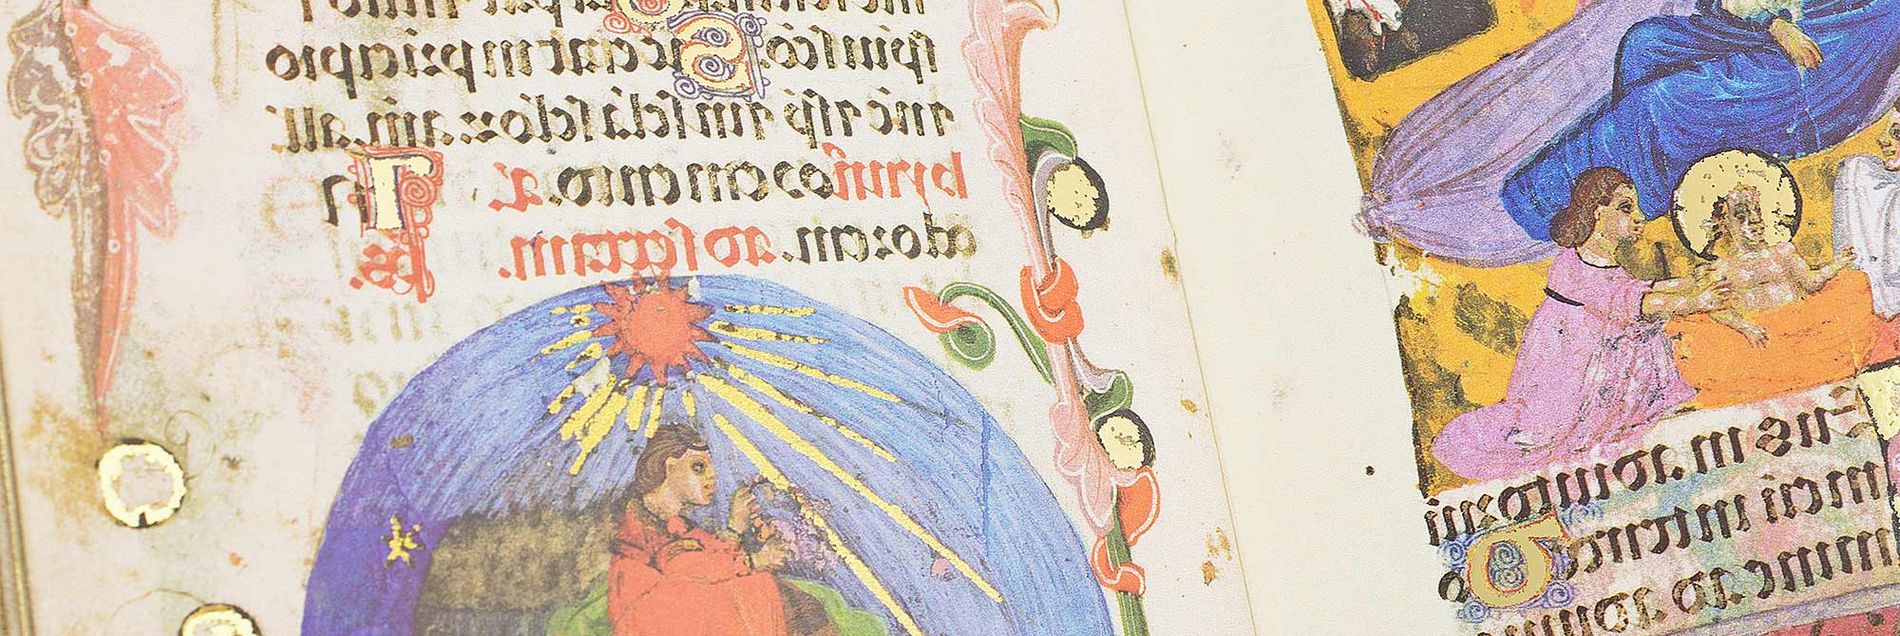 <i>“Created by a friend of Dante, illuminated with miniatures from his Divine Comedy”</i>